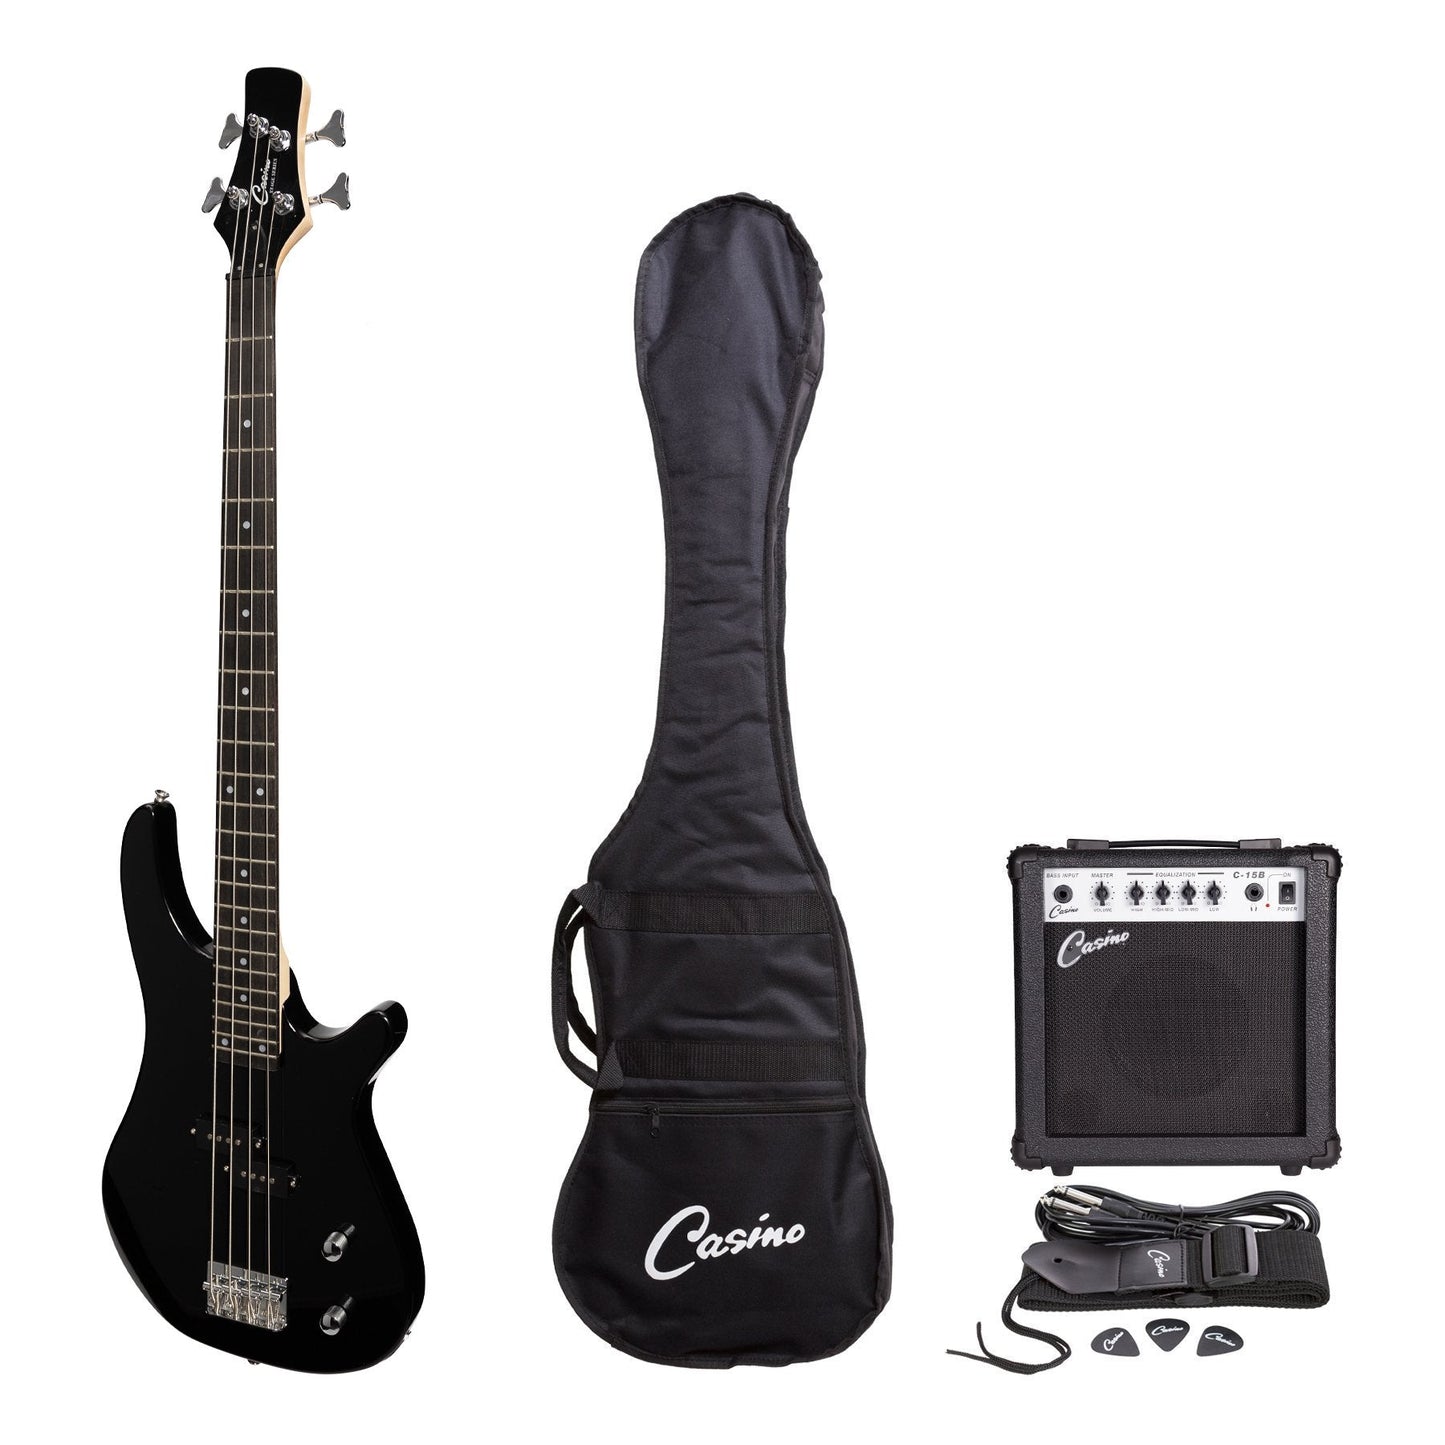 Casino '24 Series' Tune-Style Electric Bass Guitar and 15 Watt Amplifier Pack (Black)